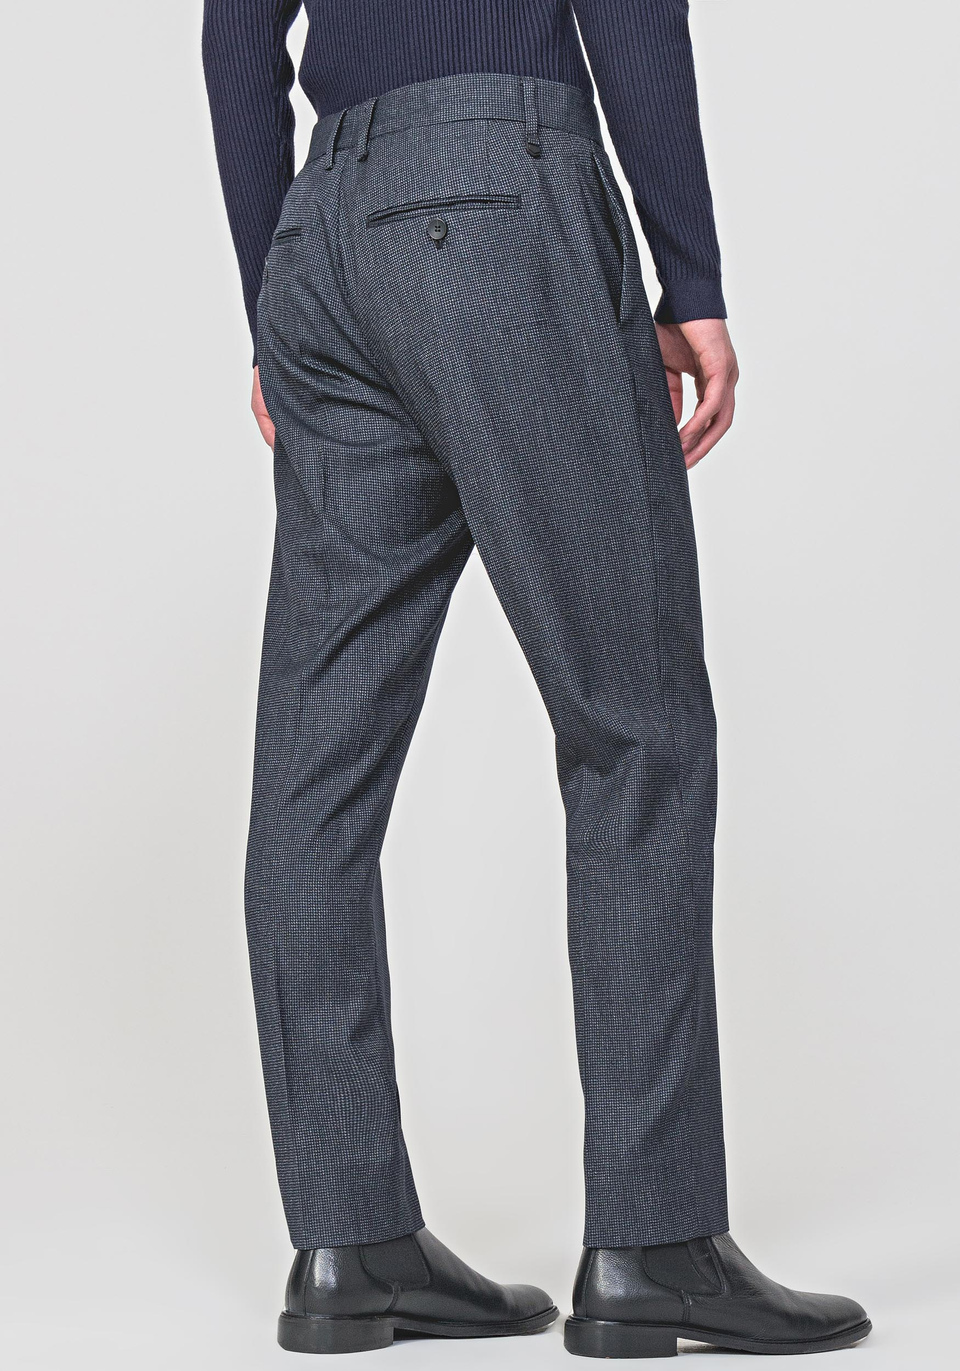 SLIM-FIT "BONNIE" TROUSERS IN A MICRO-PATTERNED WOOL BLEND - Antony Morato Online Shop